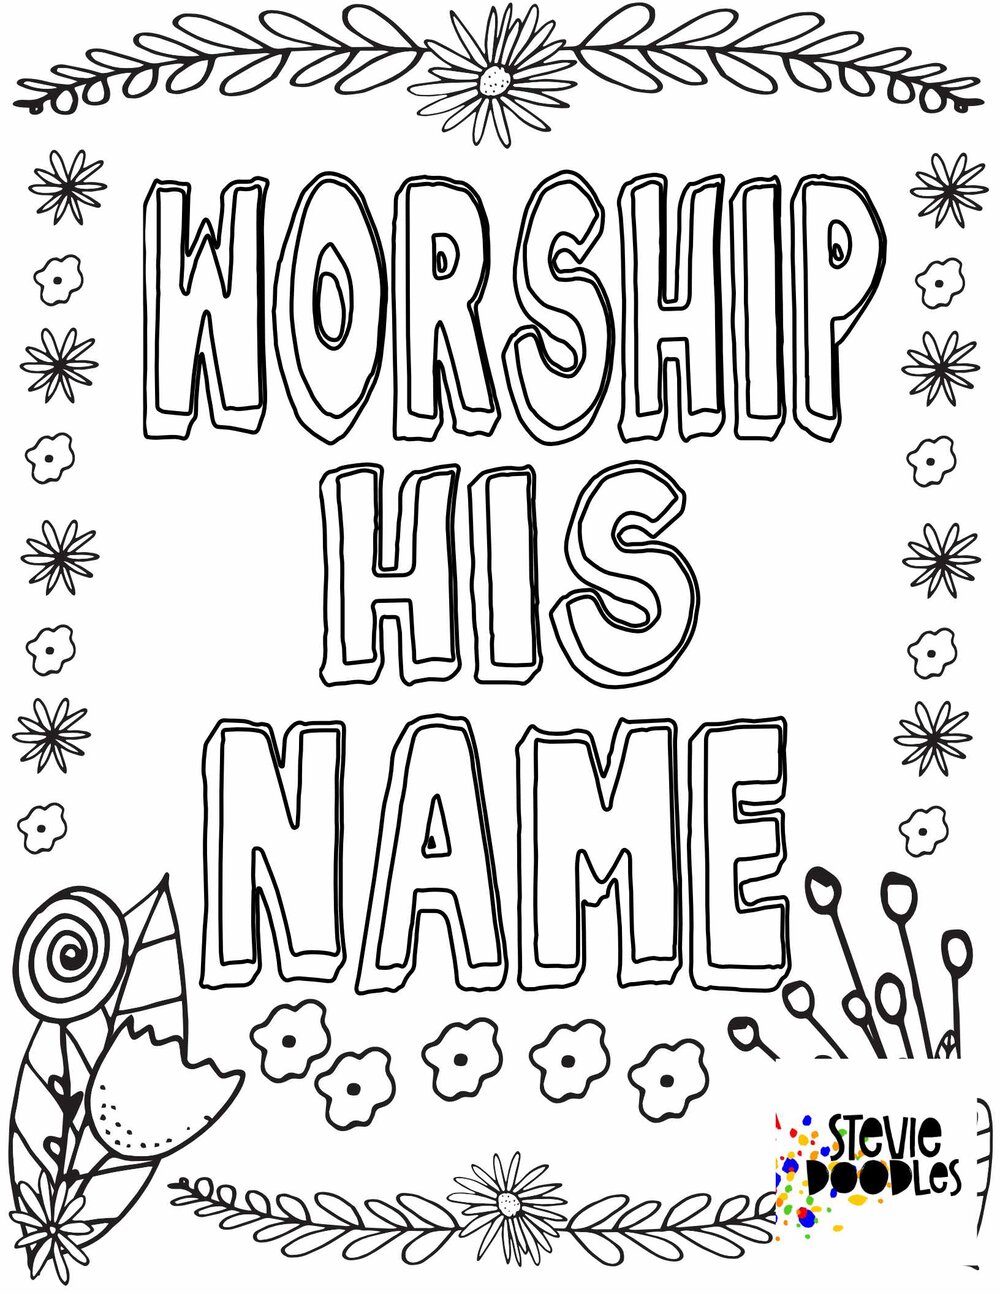 Experiencing God 1000 Free Printable Coloring Pages Stevie Doodles Free Printable Coloring Pages